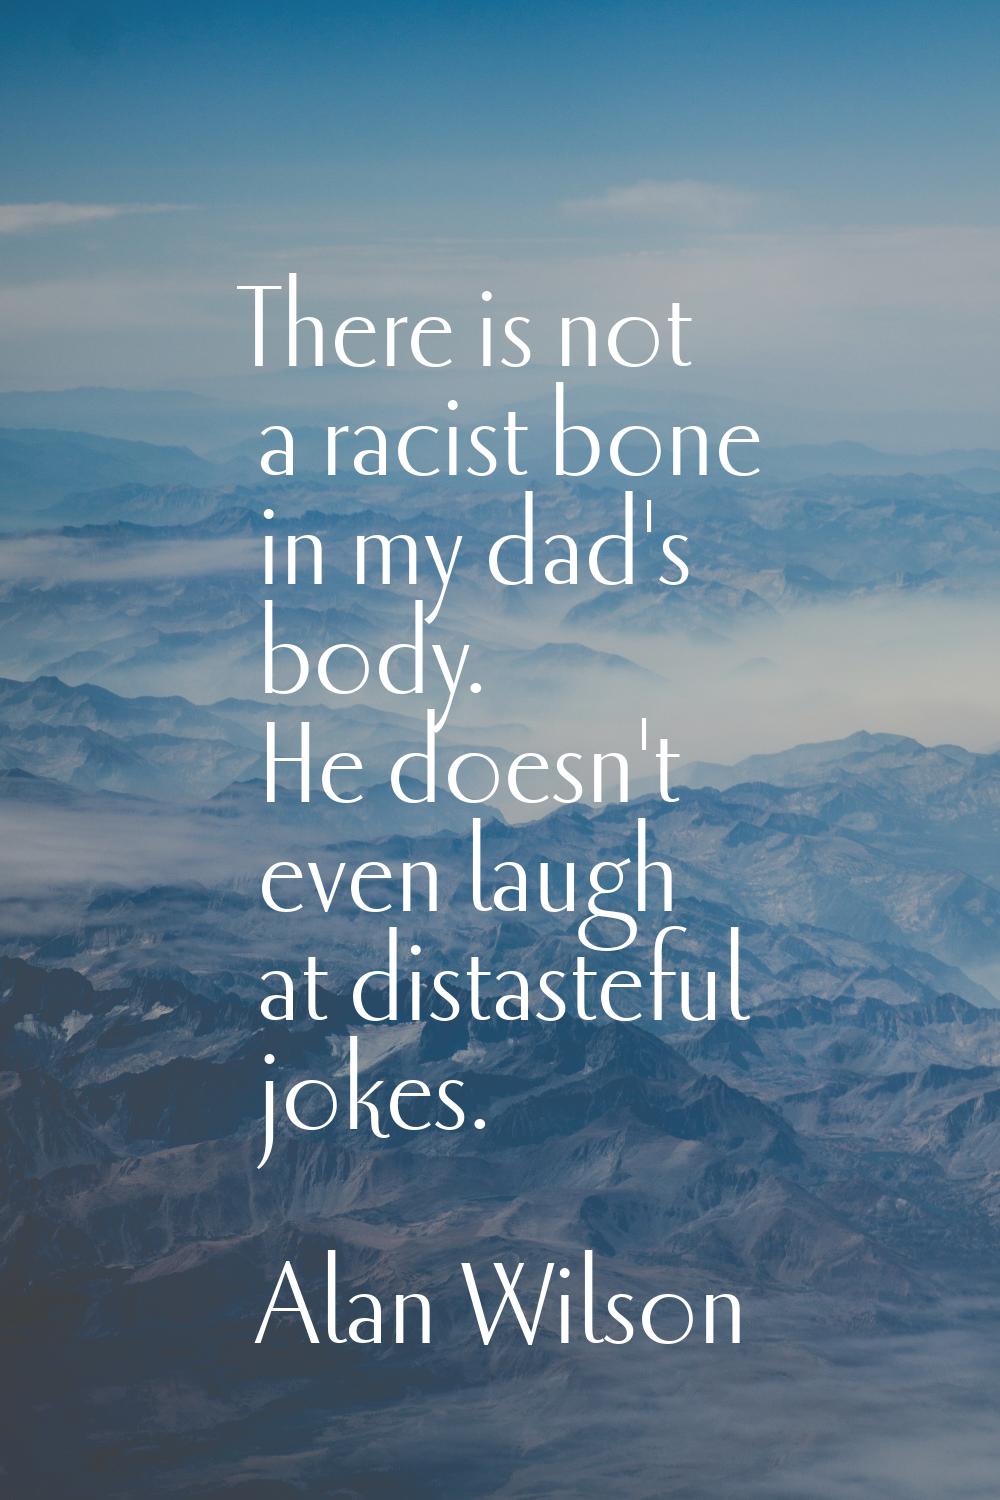 There is not a racist bone in my dad's body. He doesn't even laugh at distasteful jokes.